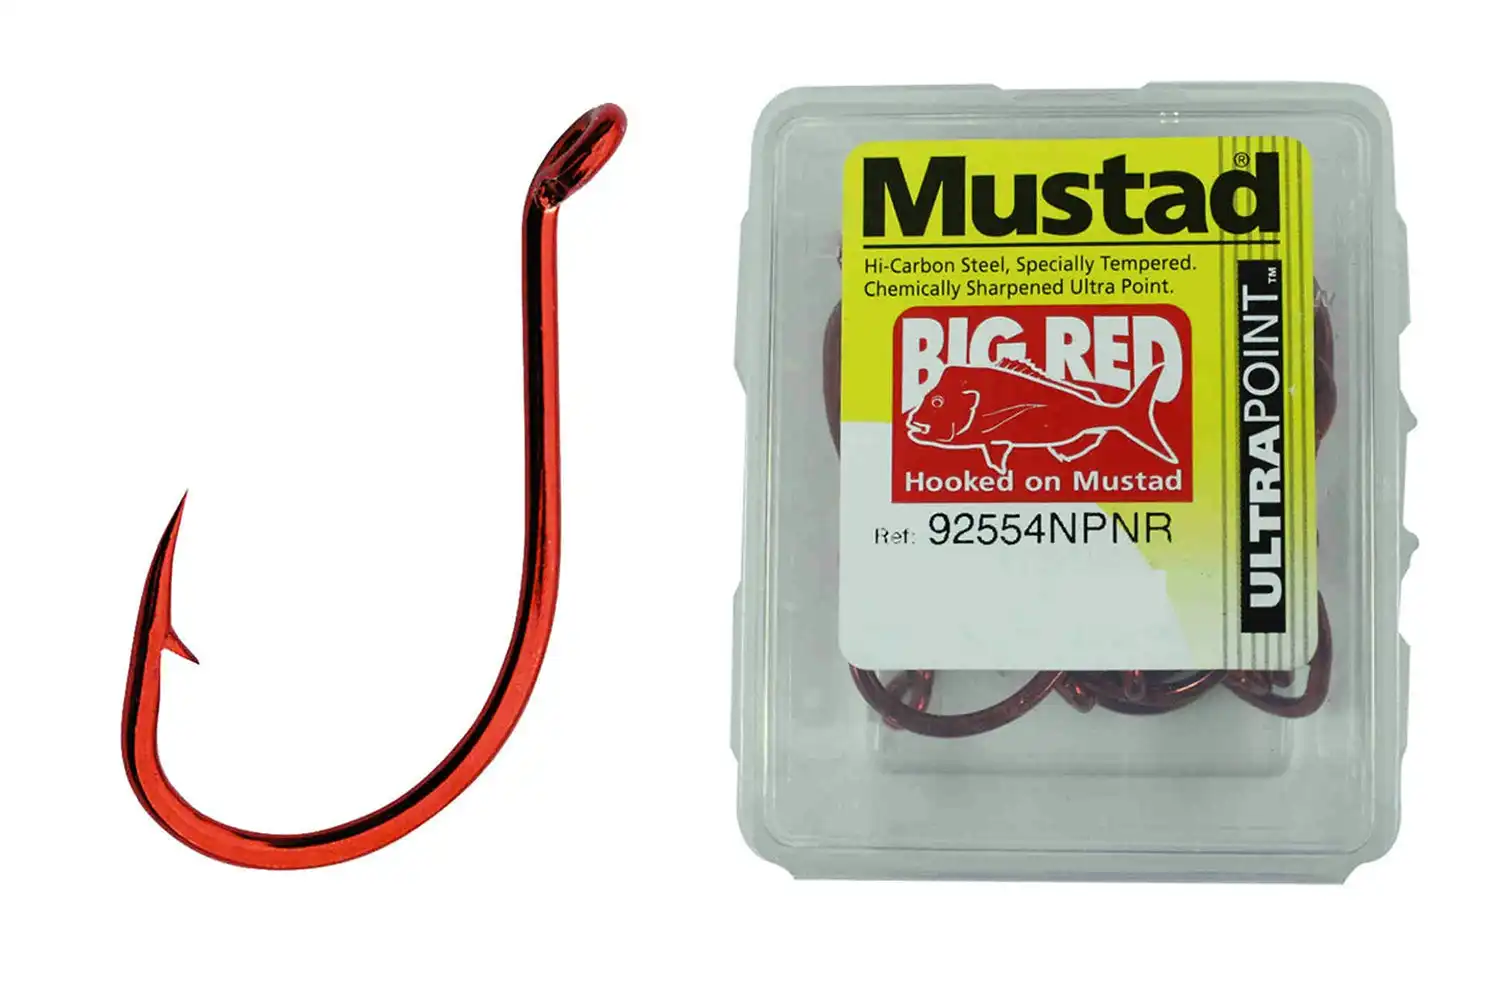 100 x Mustad 92554NPNR Big Red Chemically Sharpened Fishing Hooks, Hooked  Online